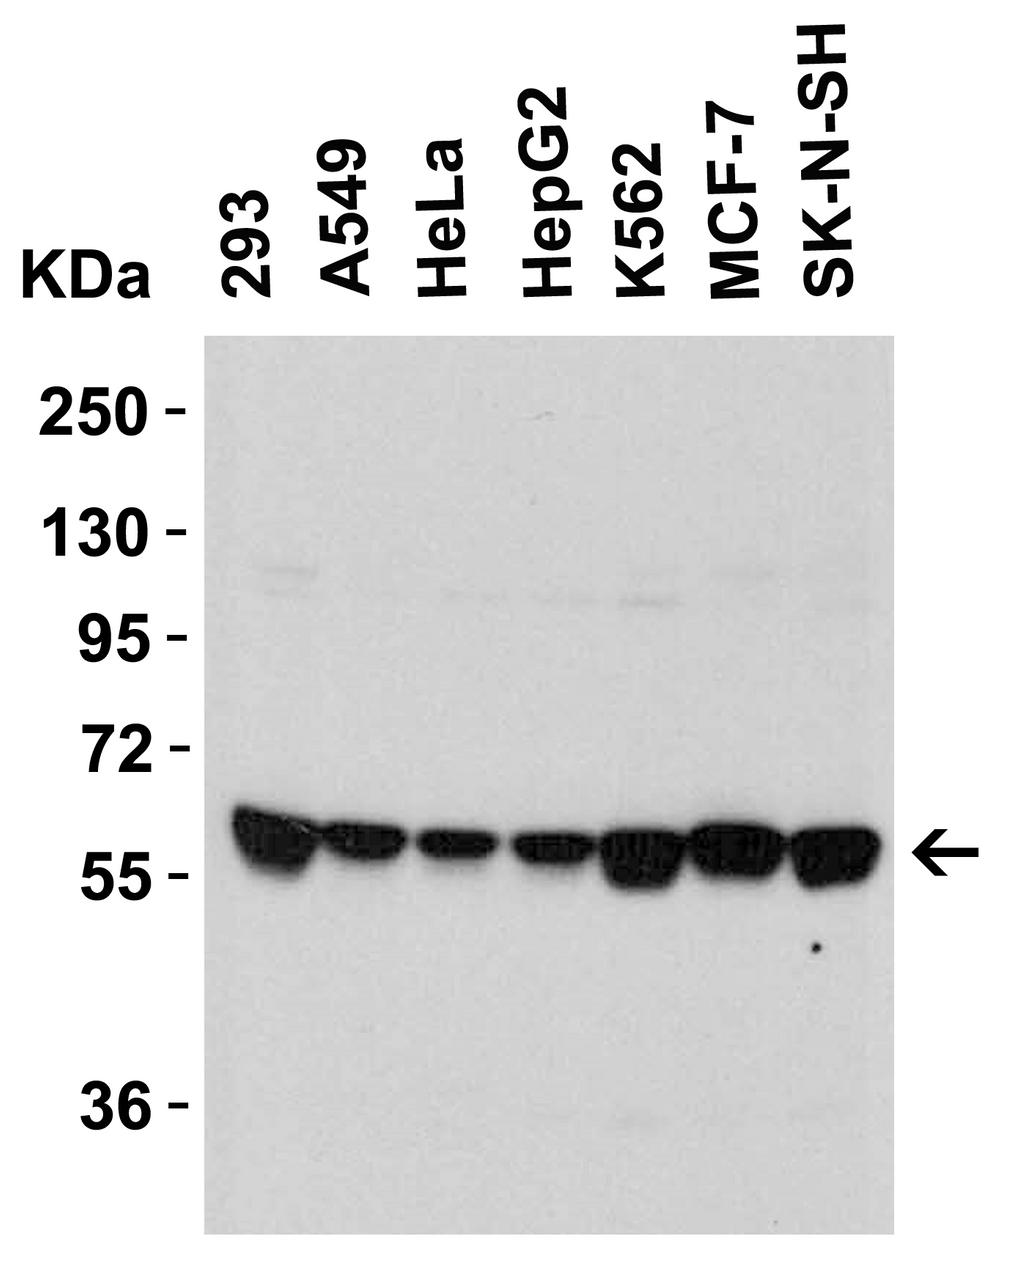 Figure 2 Western Blot Validation in Human Cell Lines
Loading: 15 ug of lysates per lane.
Antibodies: SPT2, 6305 (1 ug/mL) , 1h incubation at RT in 5% NFDM/TBST.
Secondary: Goat anti-rabbit IgG HRP conjugate at 1:10000 dilution.